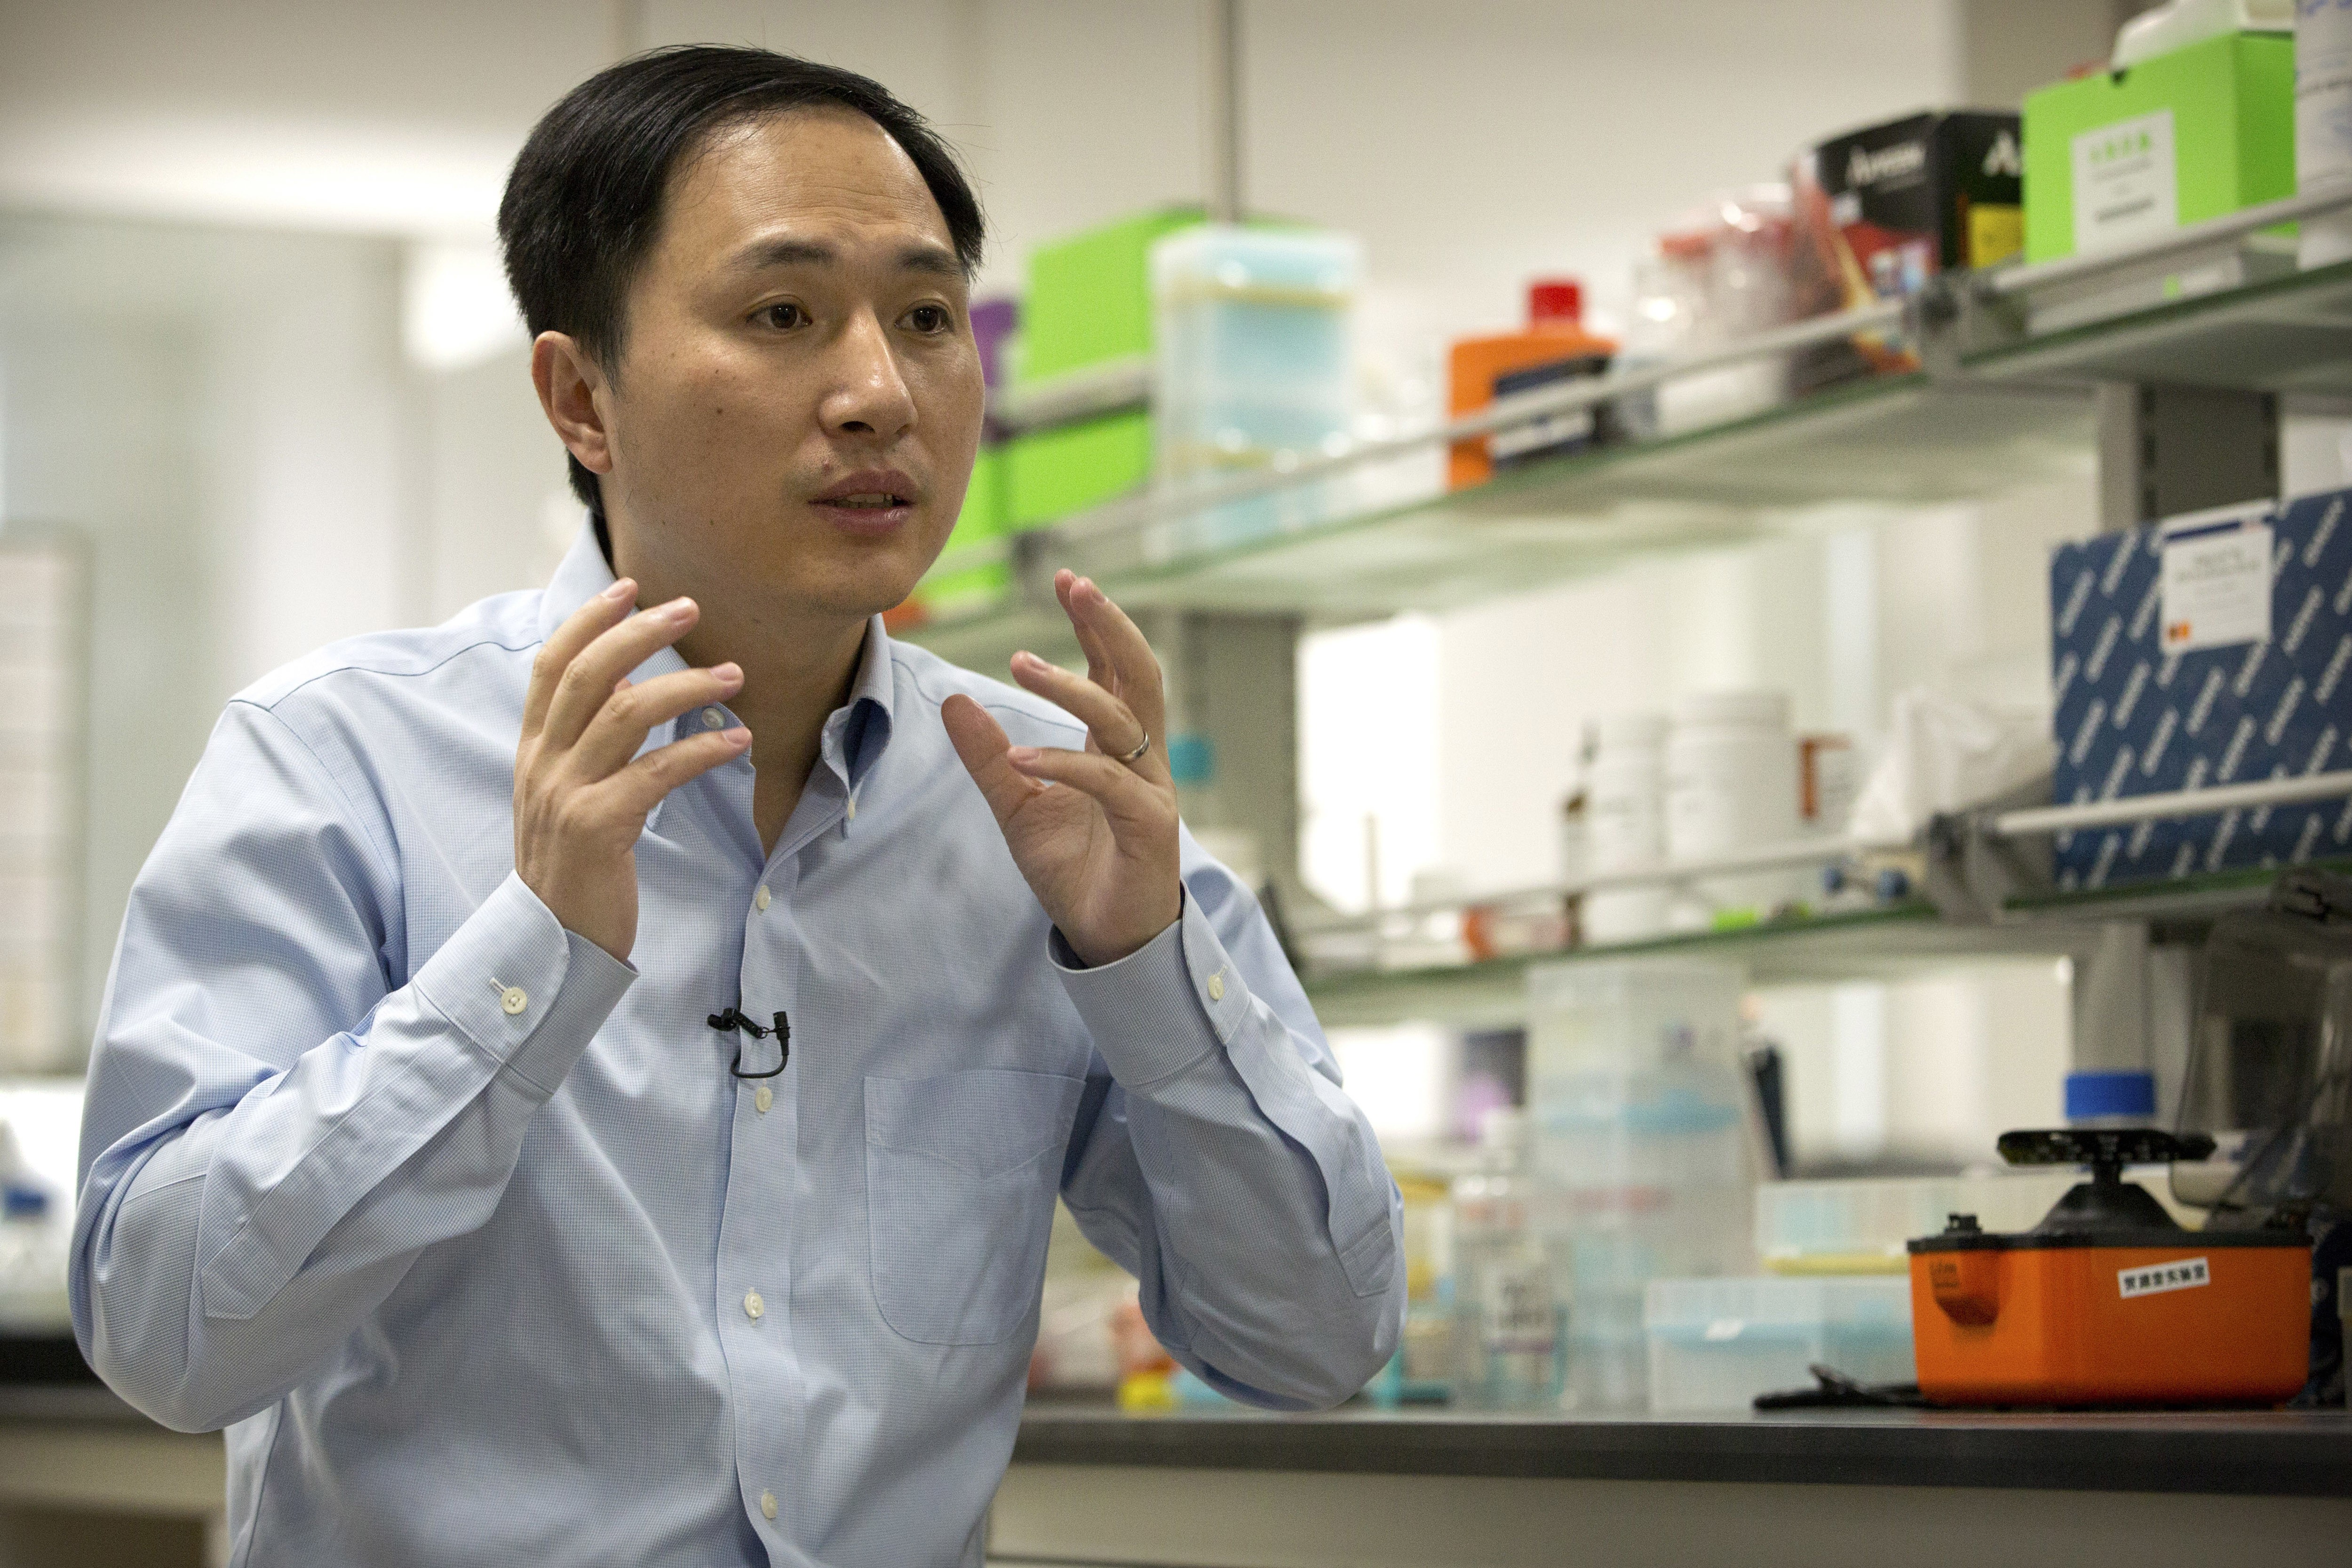 He Jiankui explains his research during an interview at a laboratory in Shenzhen in October. He revealed to the organisers of an international conference in Hong Kong on November 26 that he helped make the world’s first genetically edited babies to prevent them from being infected with HIV. Photo: AP